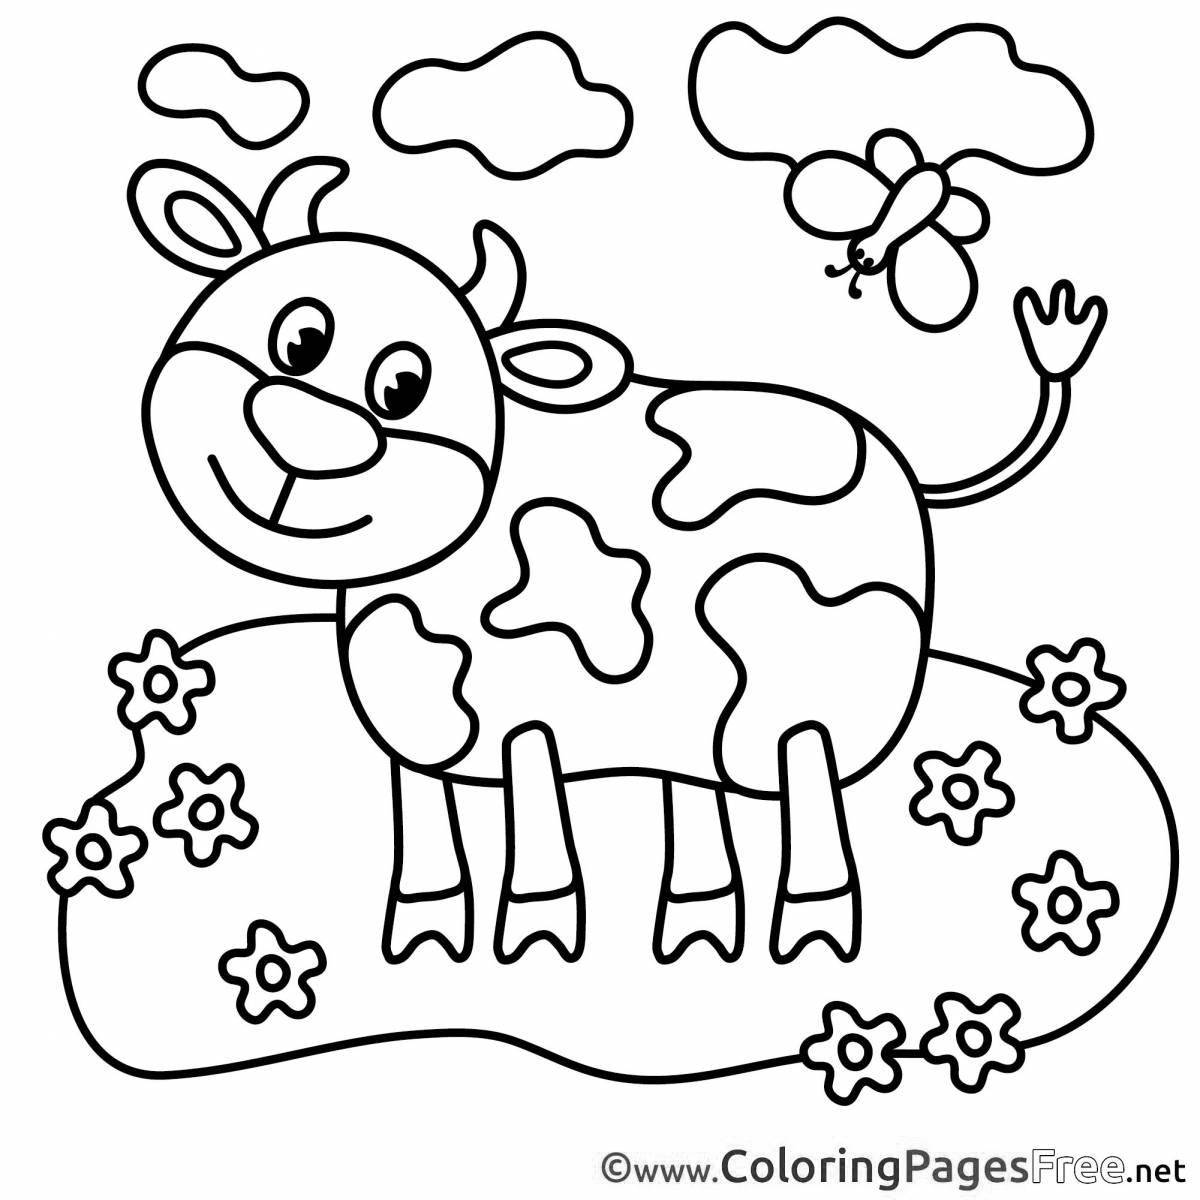 Awesome cow coloring page for 4-5 year olds